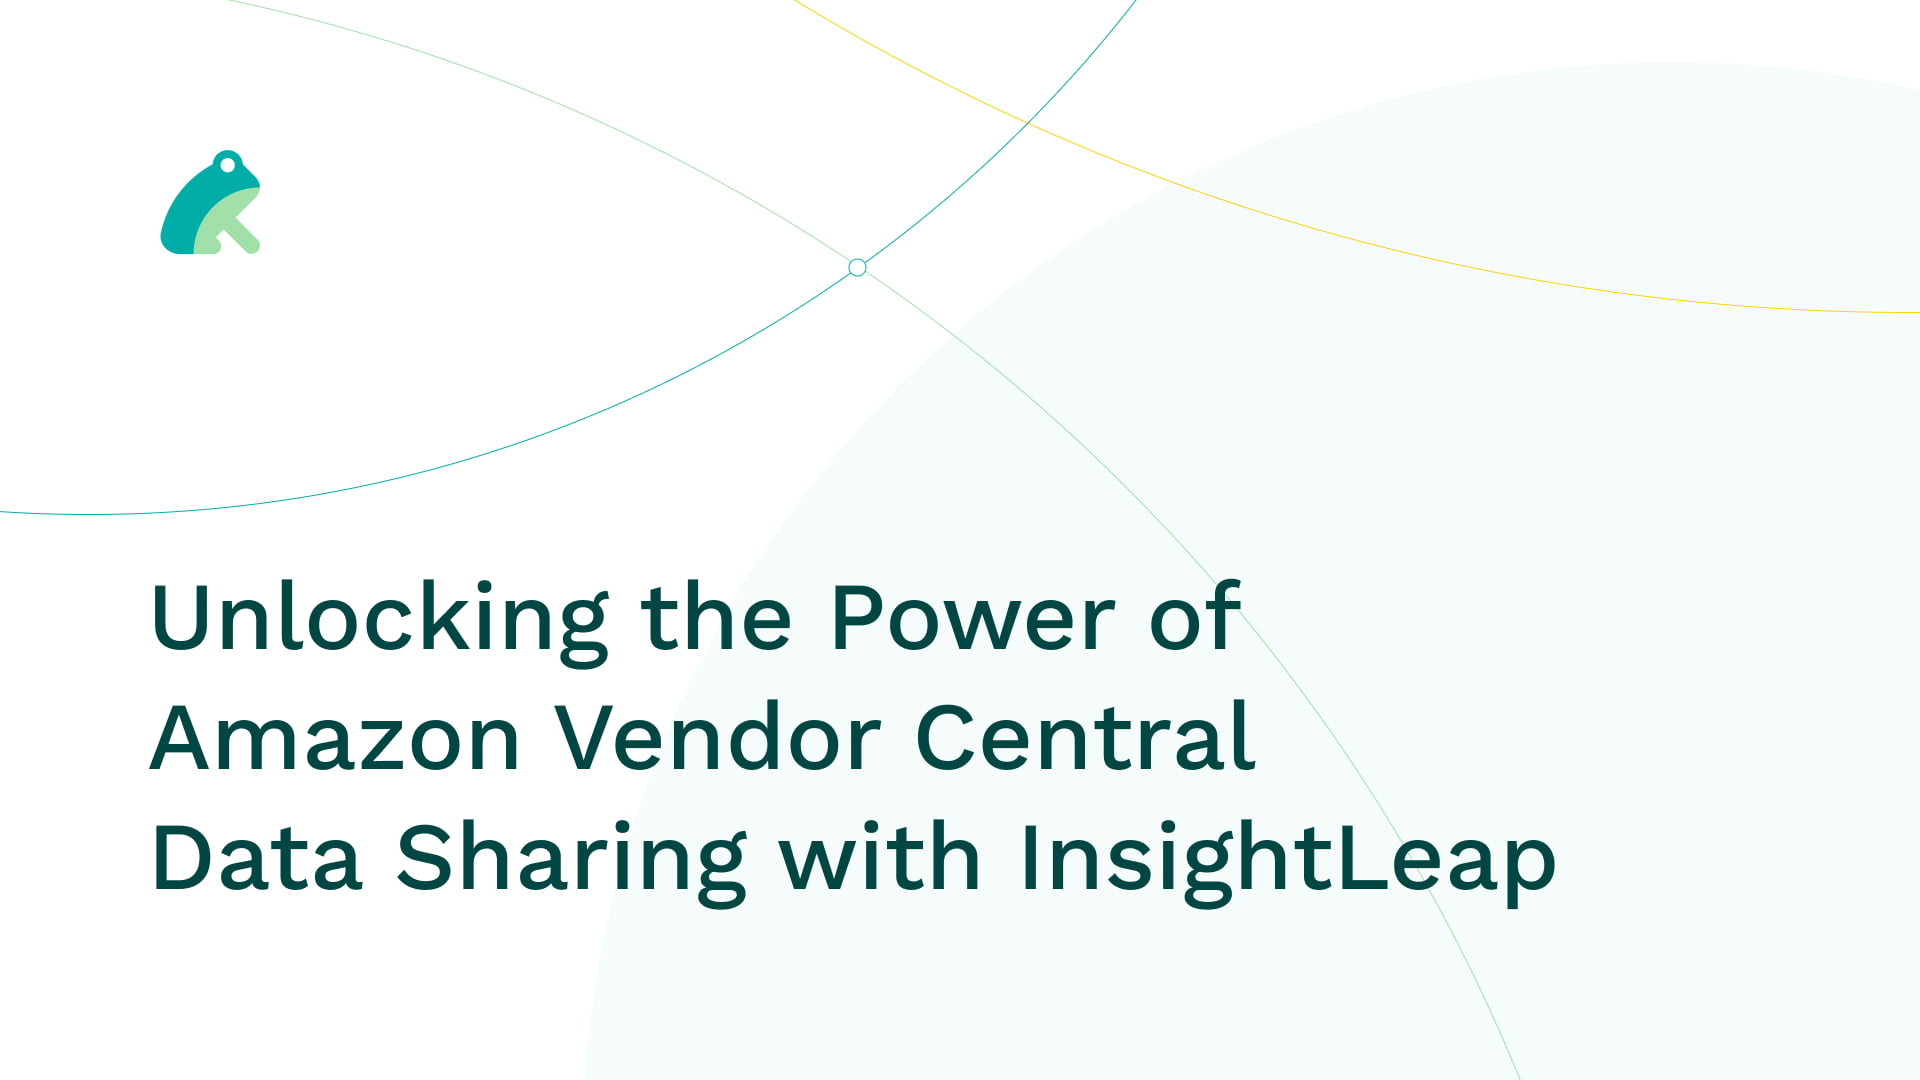 Unlocking the Power of Amazon Vendor Central Data Sharing with InsightLeap